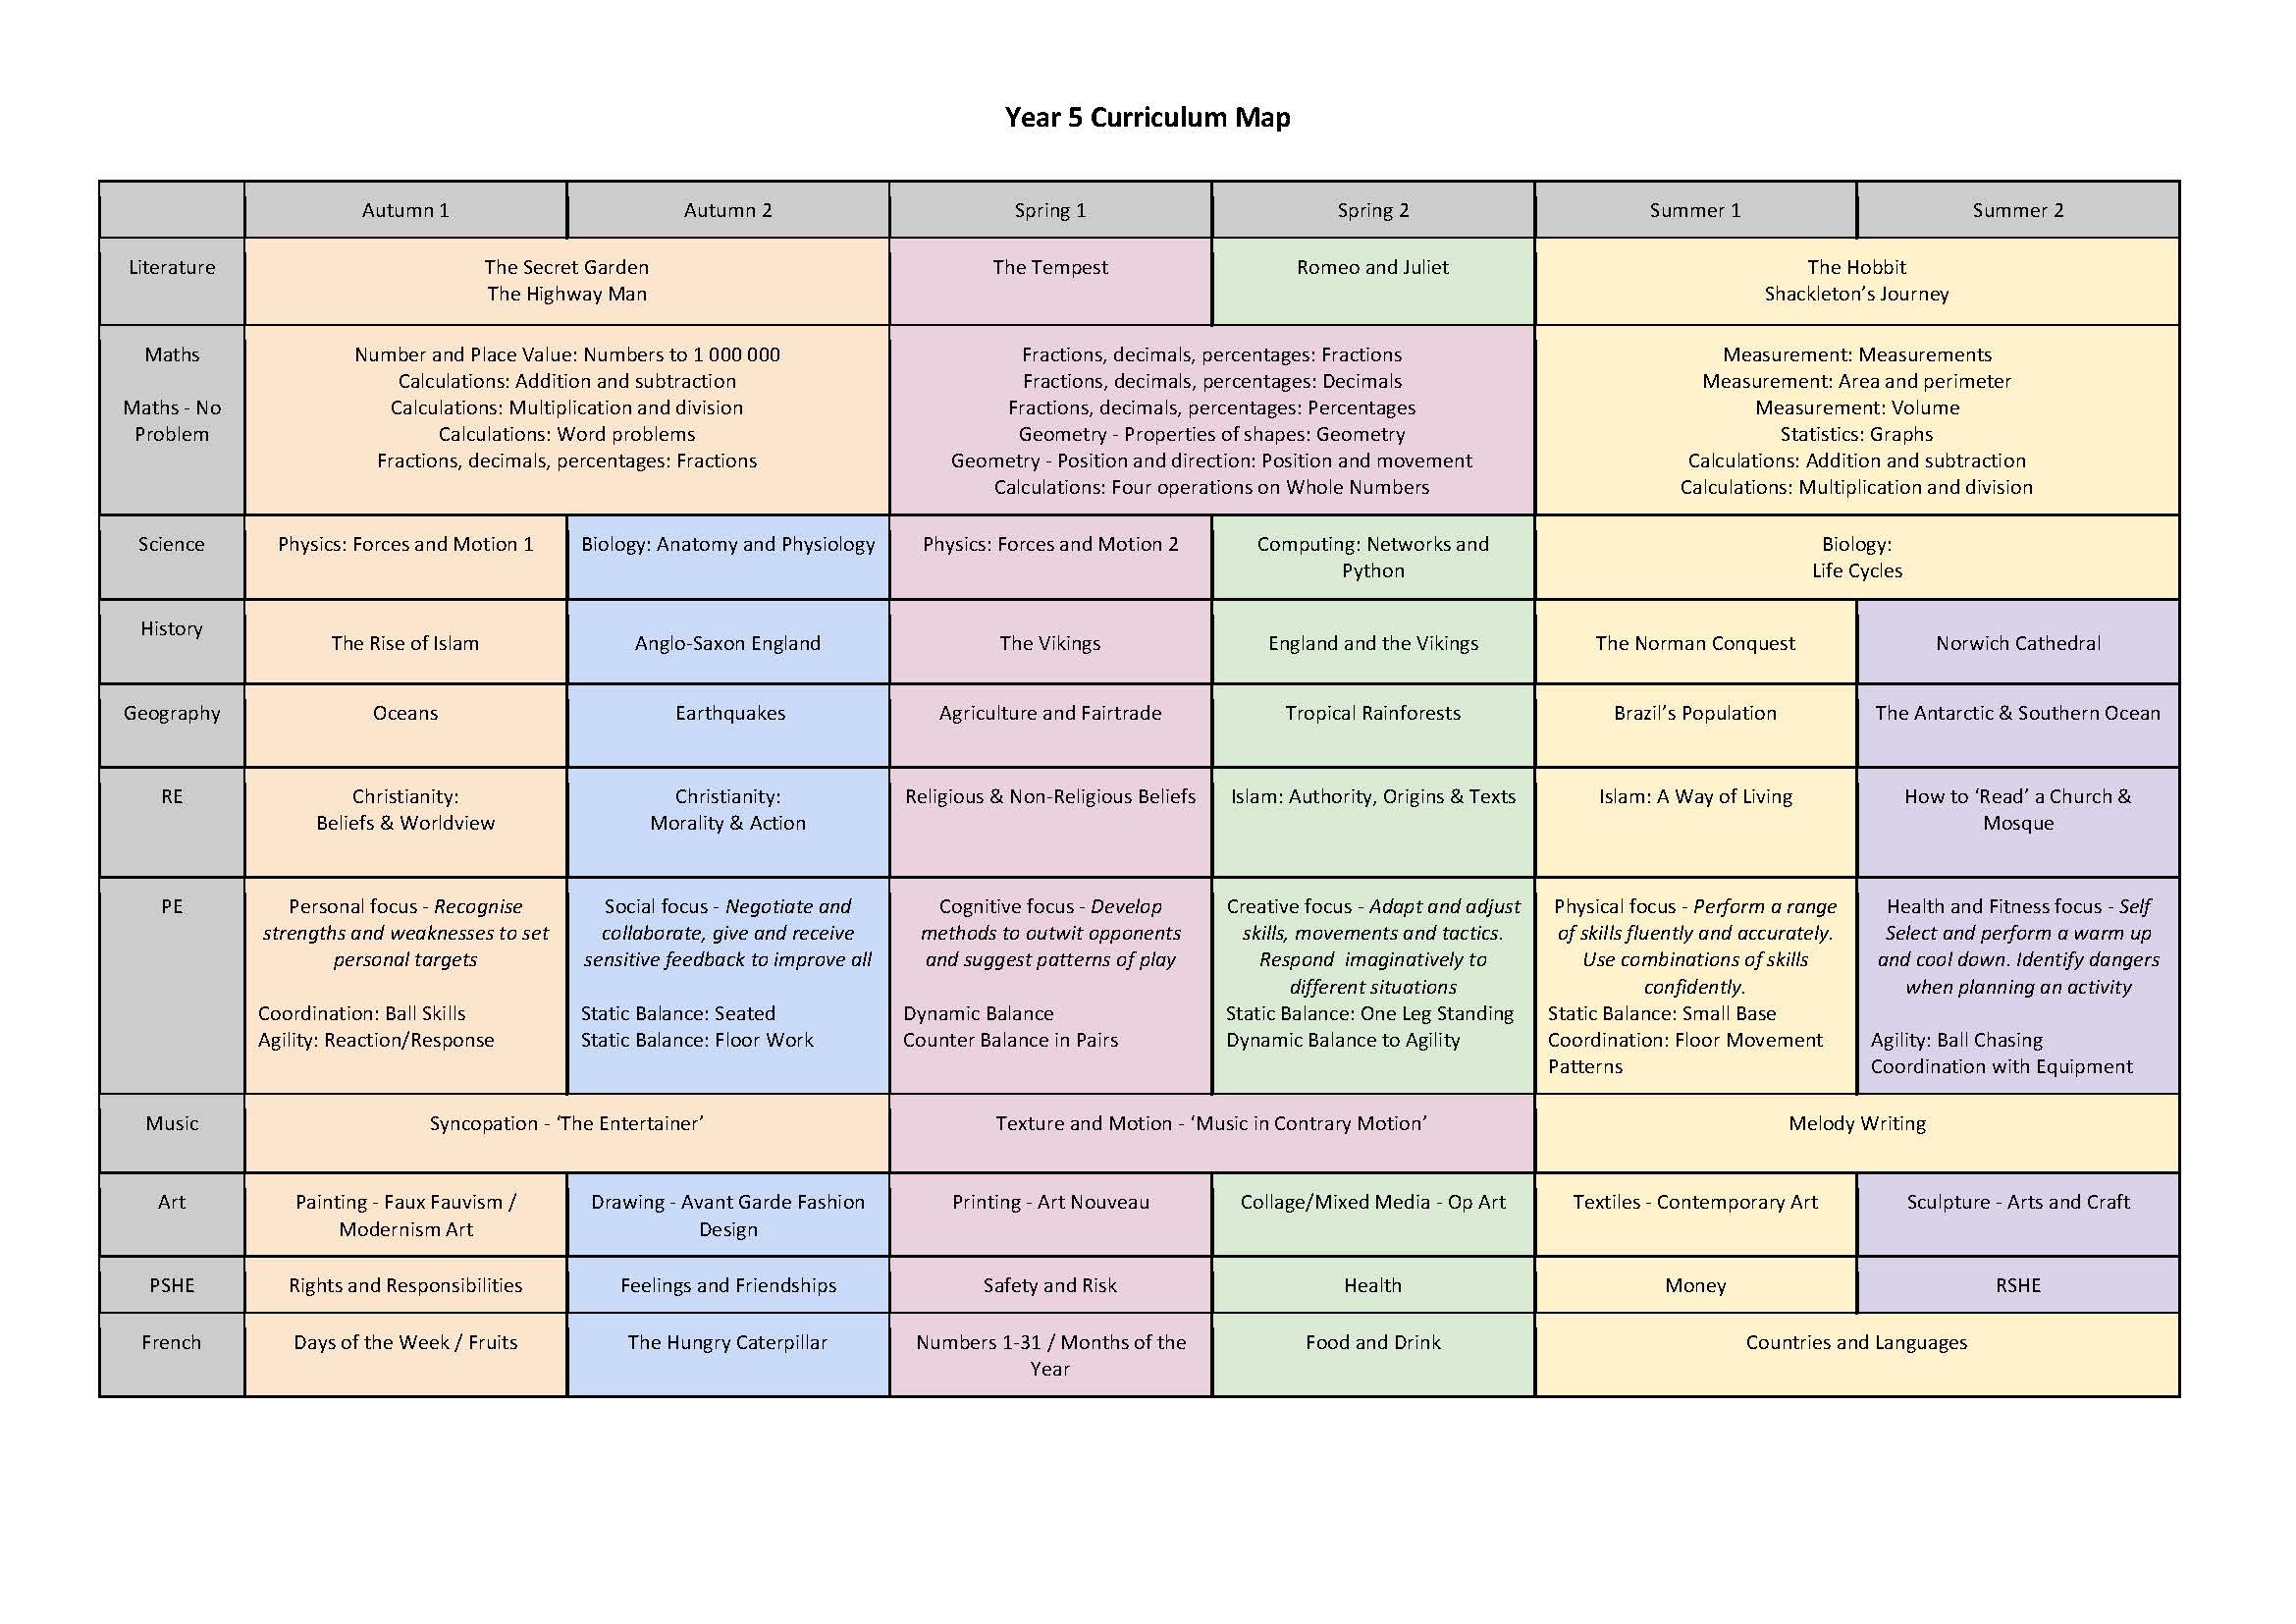 Year 5 Curriculum Overview